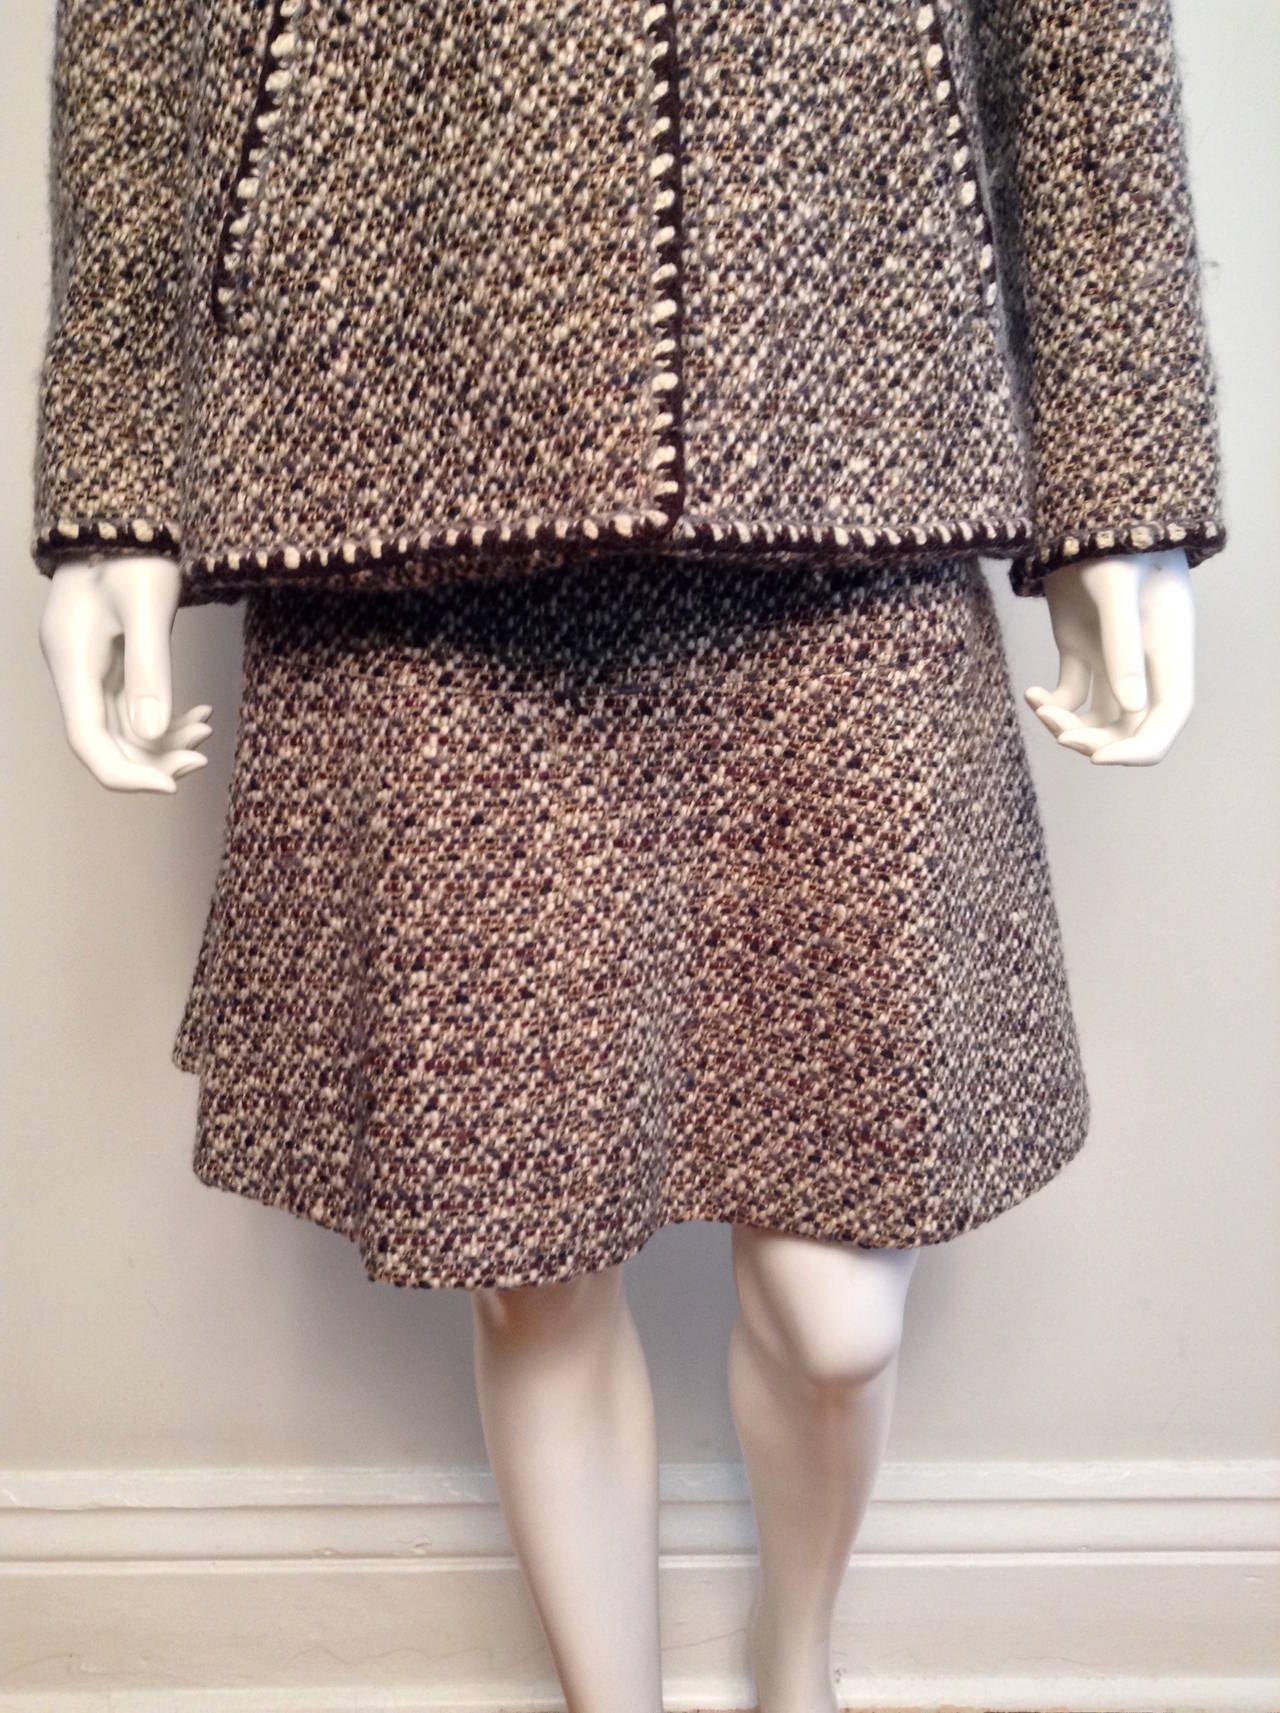 Chanel Vintage Brown Tweed Skirt Suit Size 42 In Excellent Condition For Sale In Toronto, Ontario